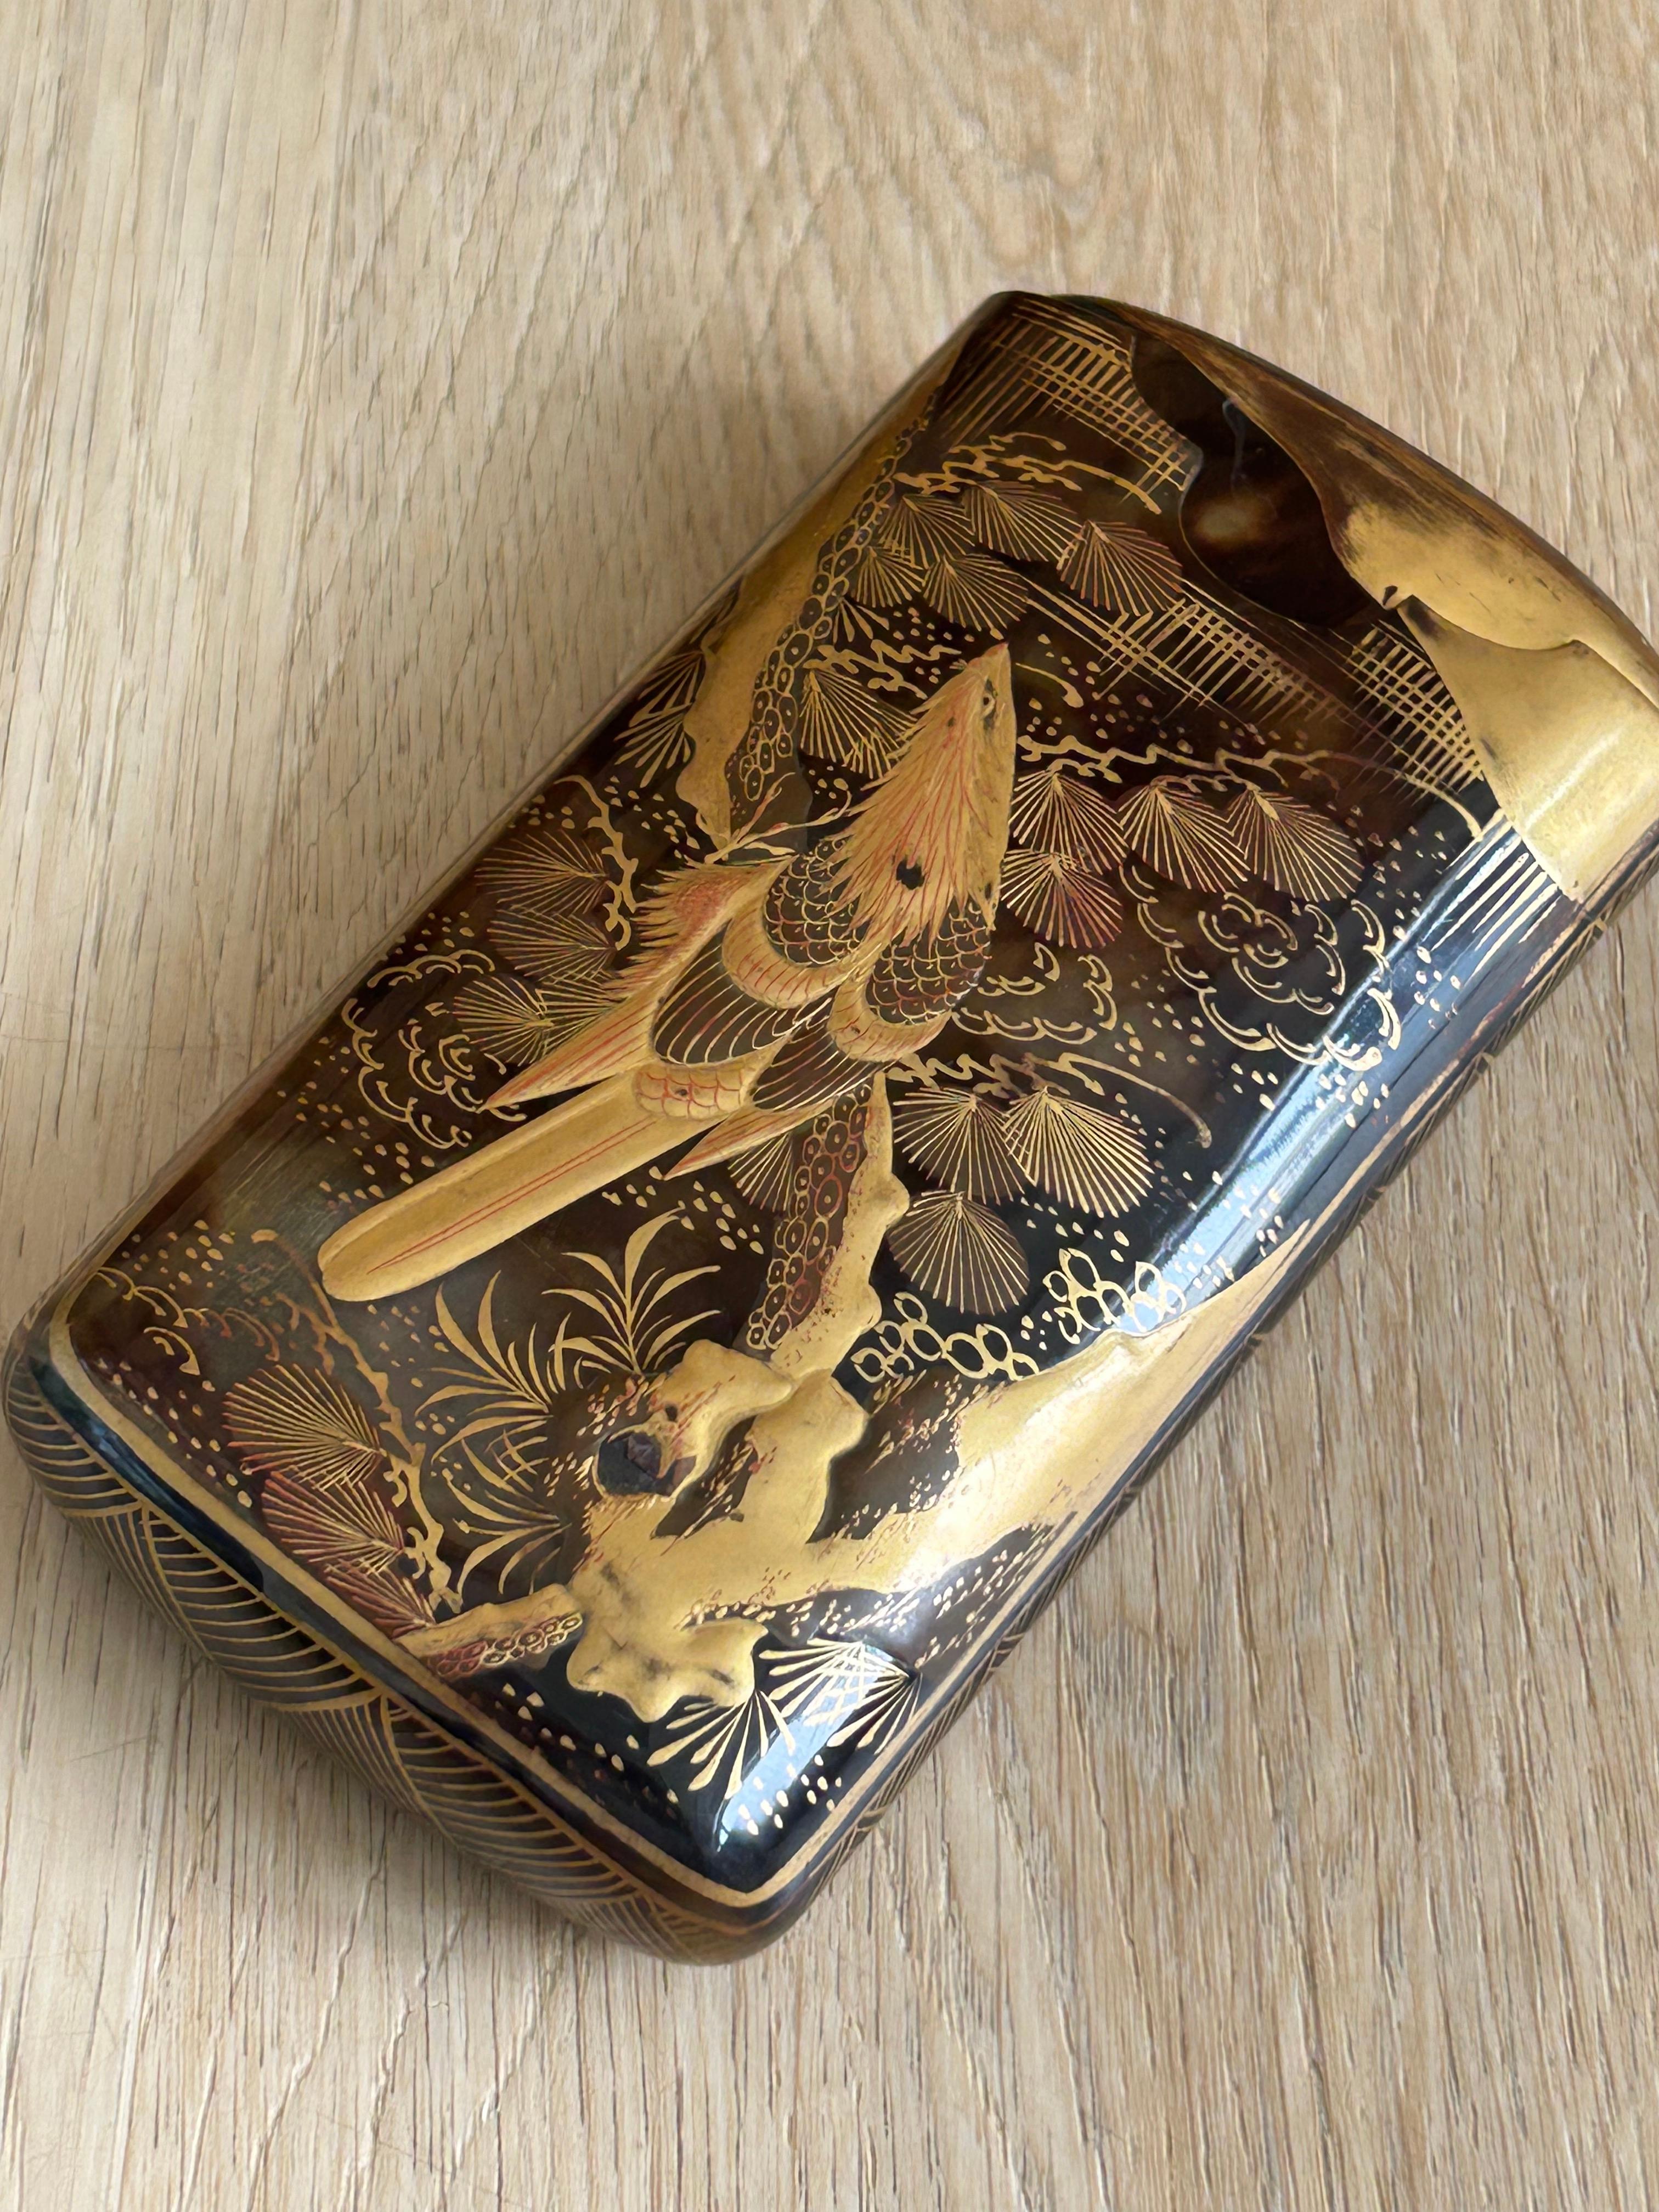 Tortoiseshell cigar holder, with Japanese inspired decoration. Painted and inlaid with some losses. On one side it represent a bird on a branch in the middle of nature and on the other side coins and gold bars.

The pictures are part of the